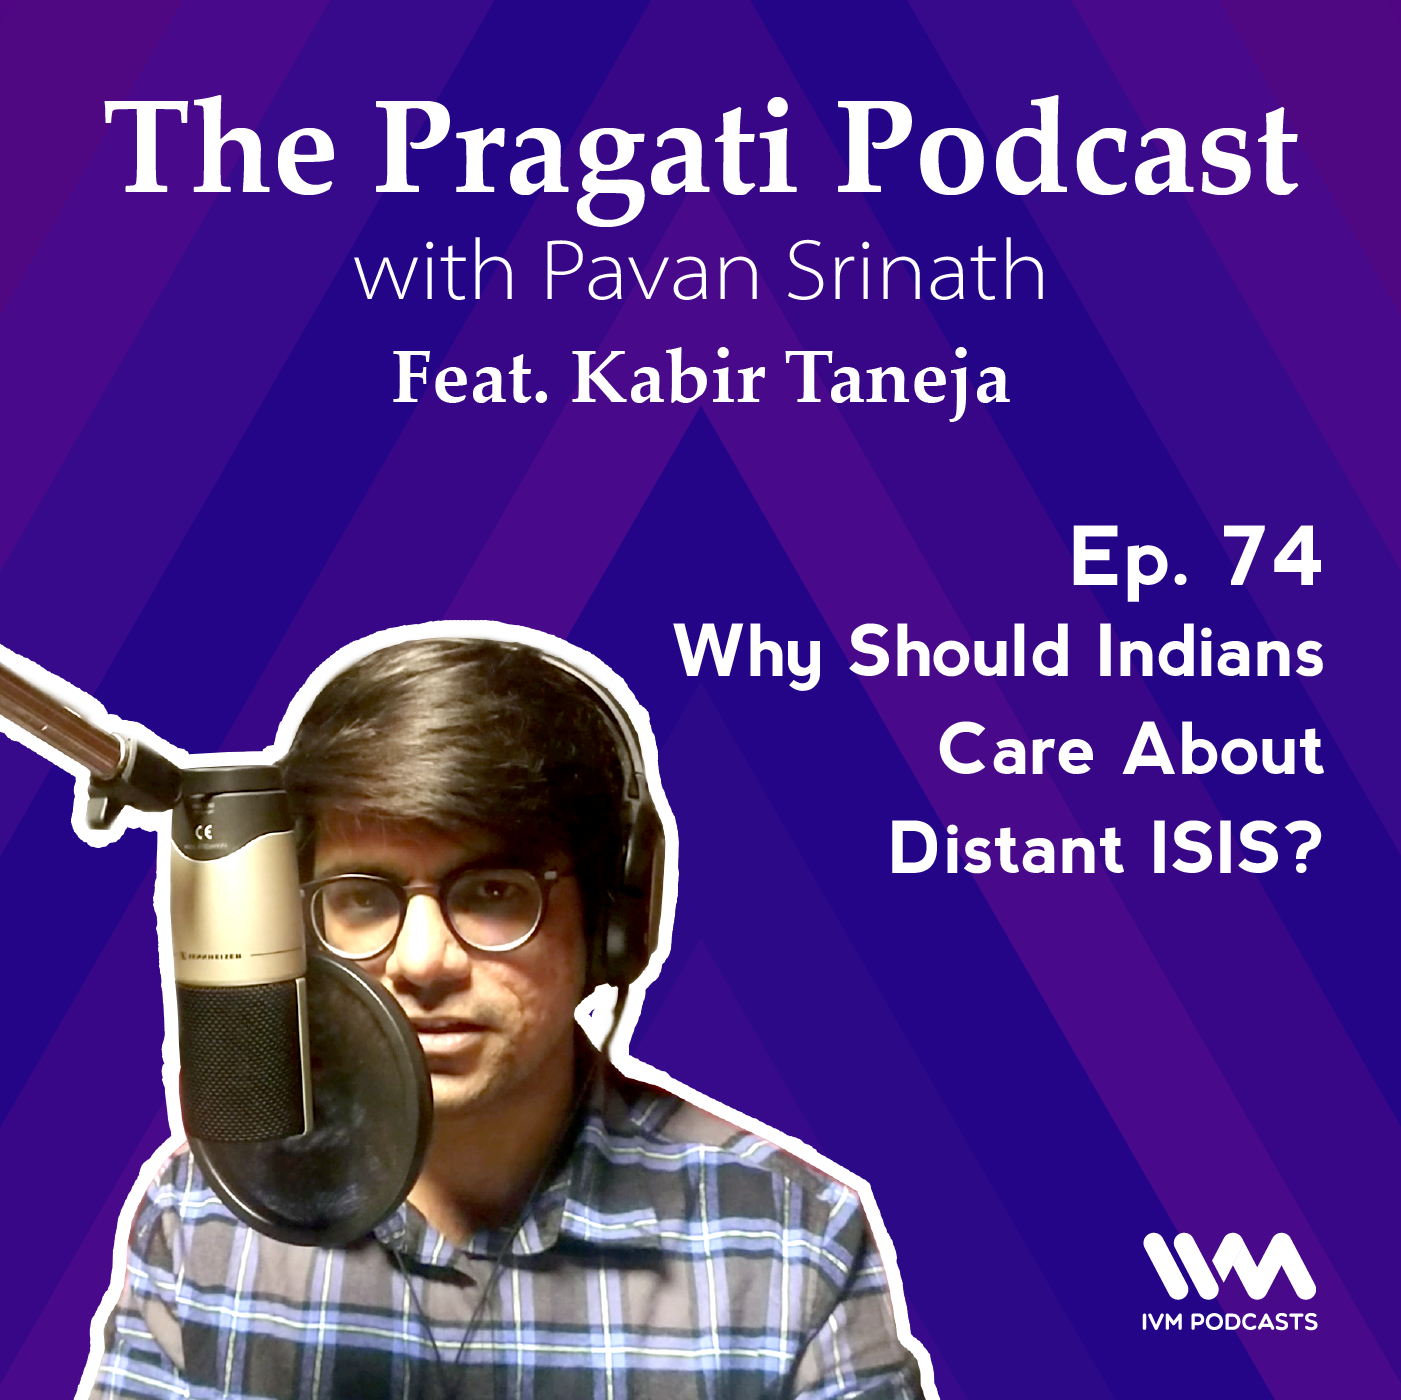 Ep. 74: Why Should Indians Care About Distant ISIS?